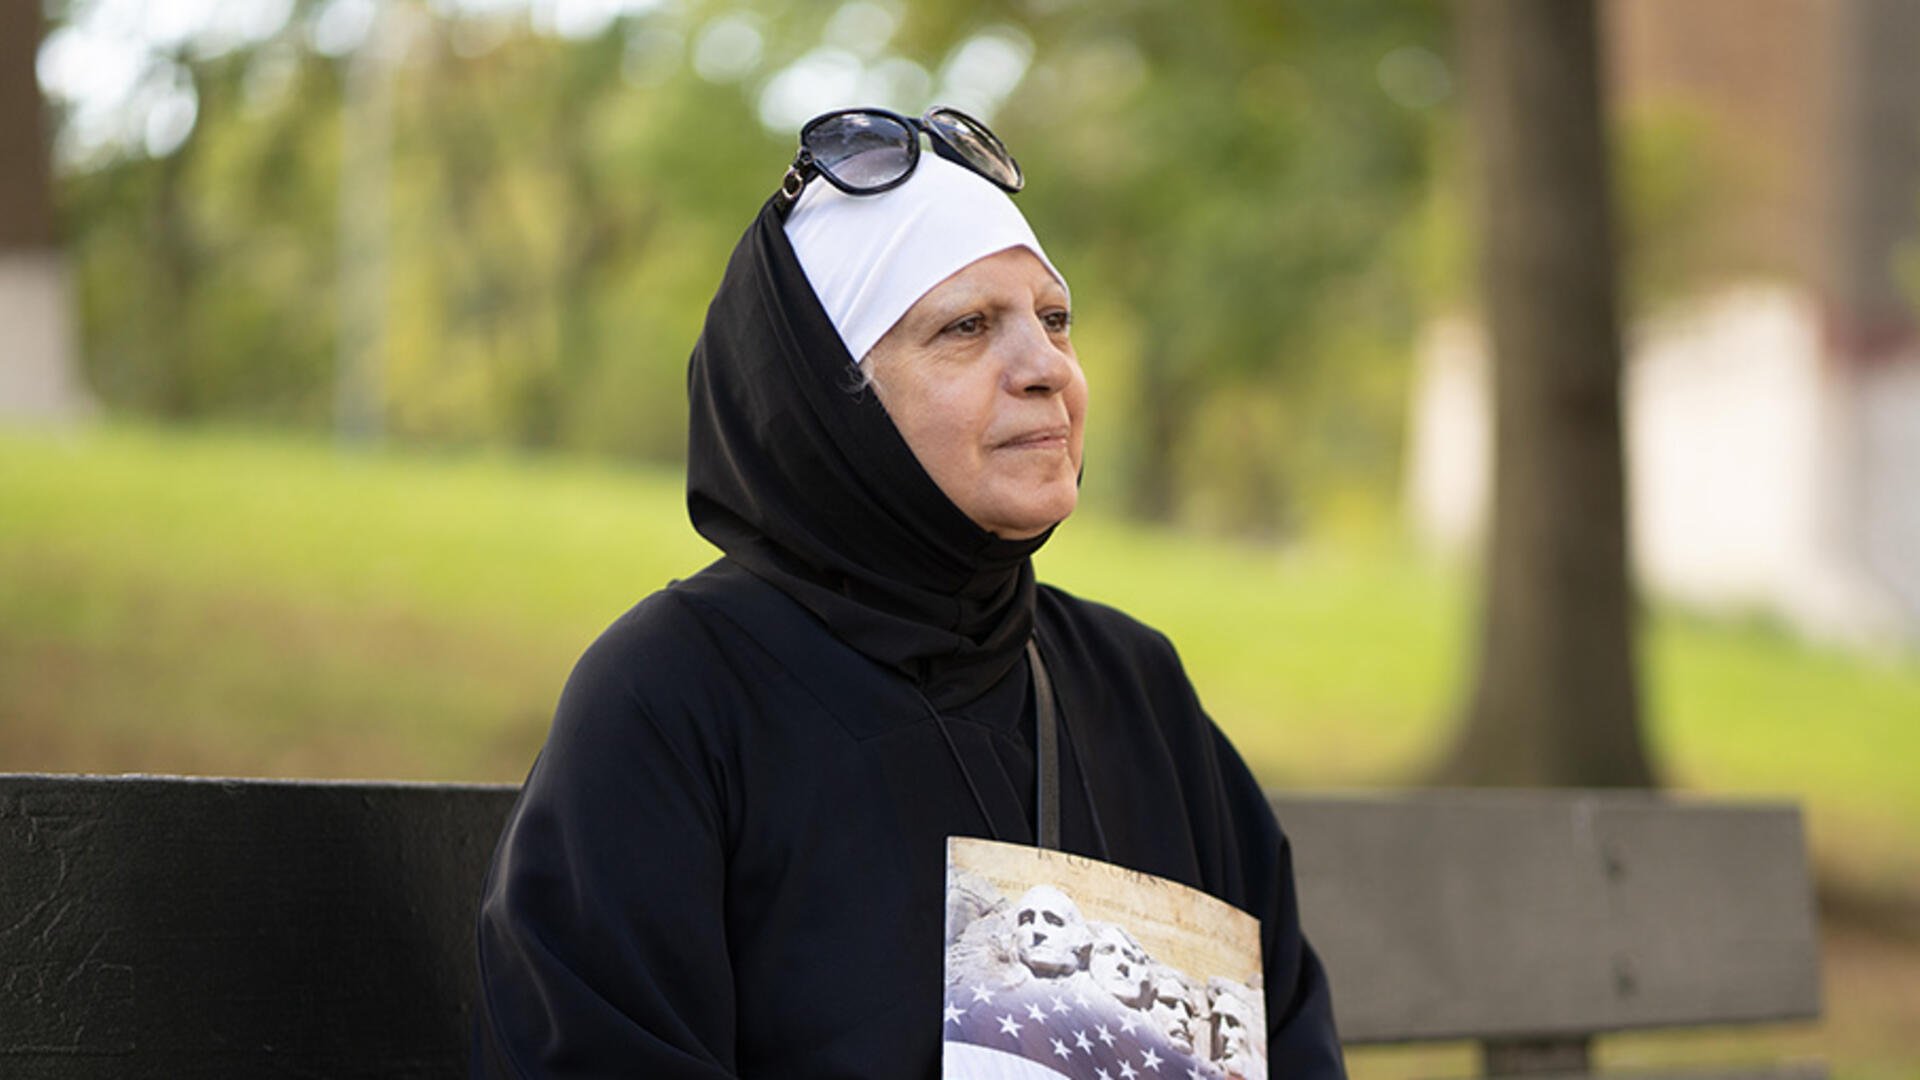 Maha al-Obaidi sits on a park bench looking off into the distance and holding a U.S. citizenship test study book. 